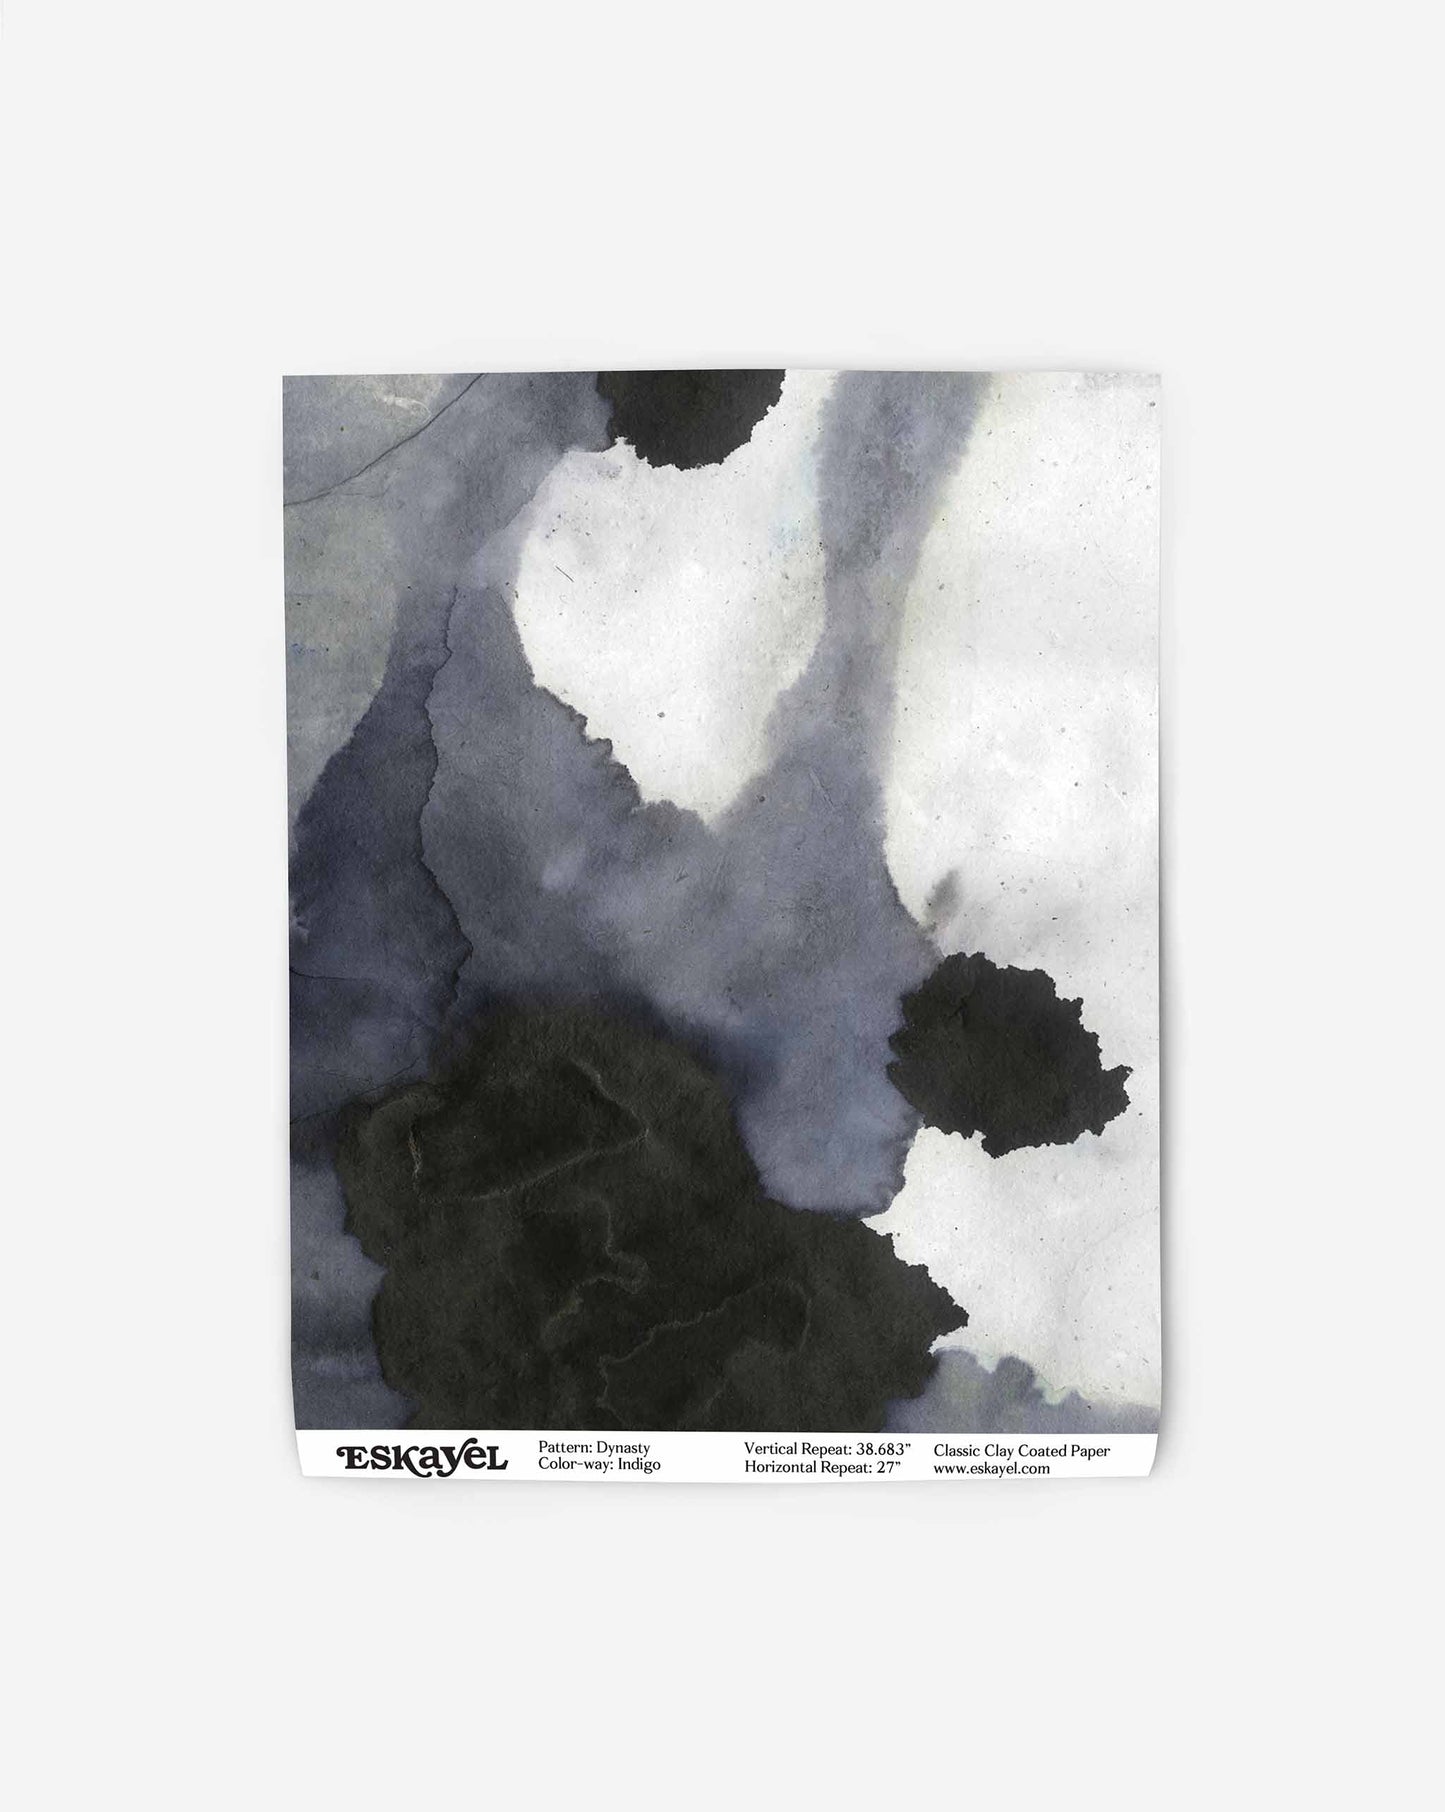 A piece of paper with an abstract black and gray watercolor pattern, featuring the brand name "Eskayel" and pattern details at the bottom, showcases the high-end Dynasty Wallpaper||Indigo in an exquisite Indigo colorway.